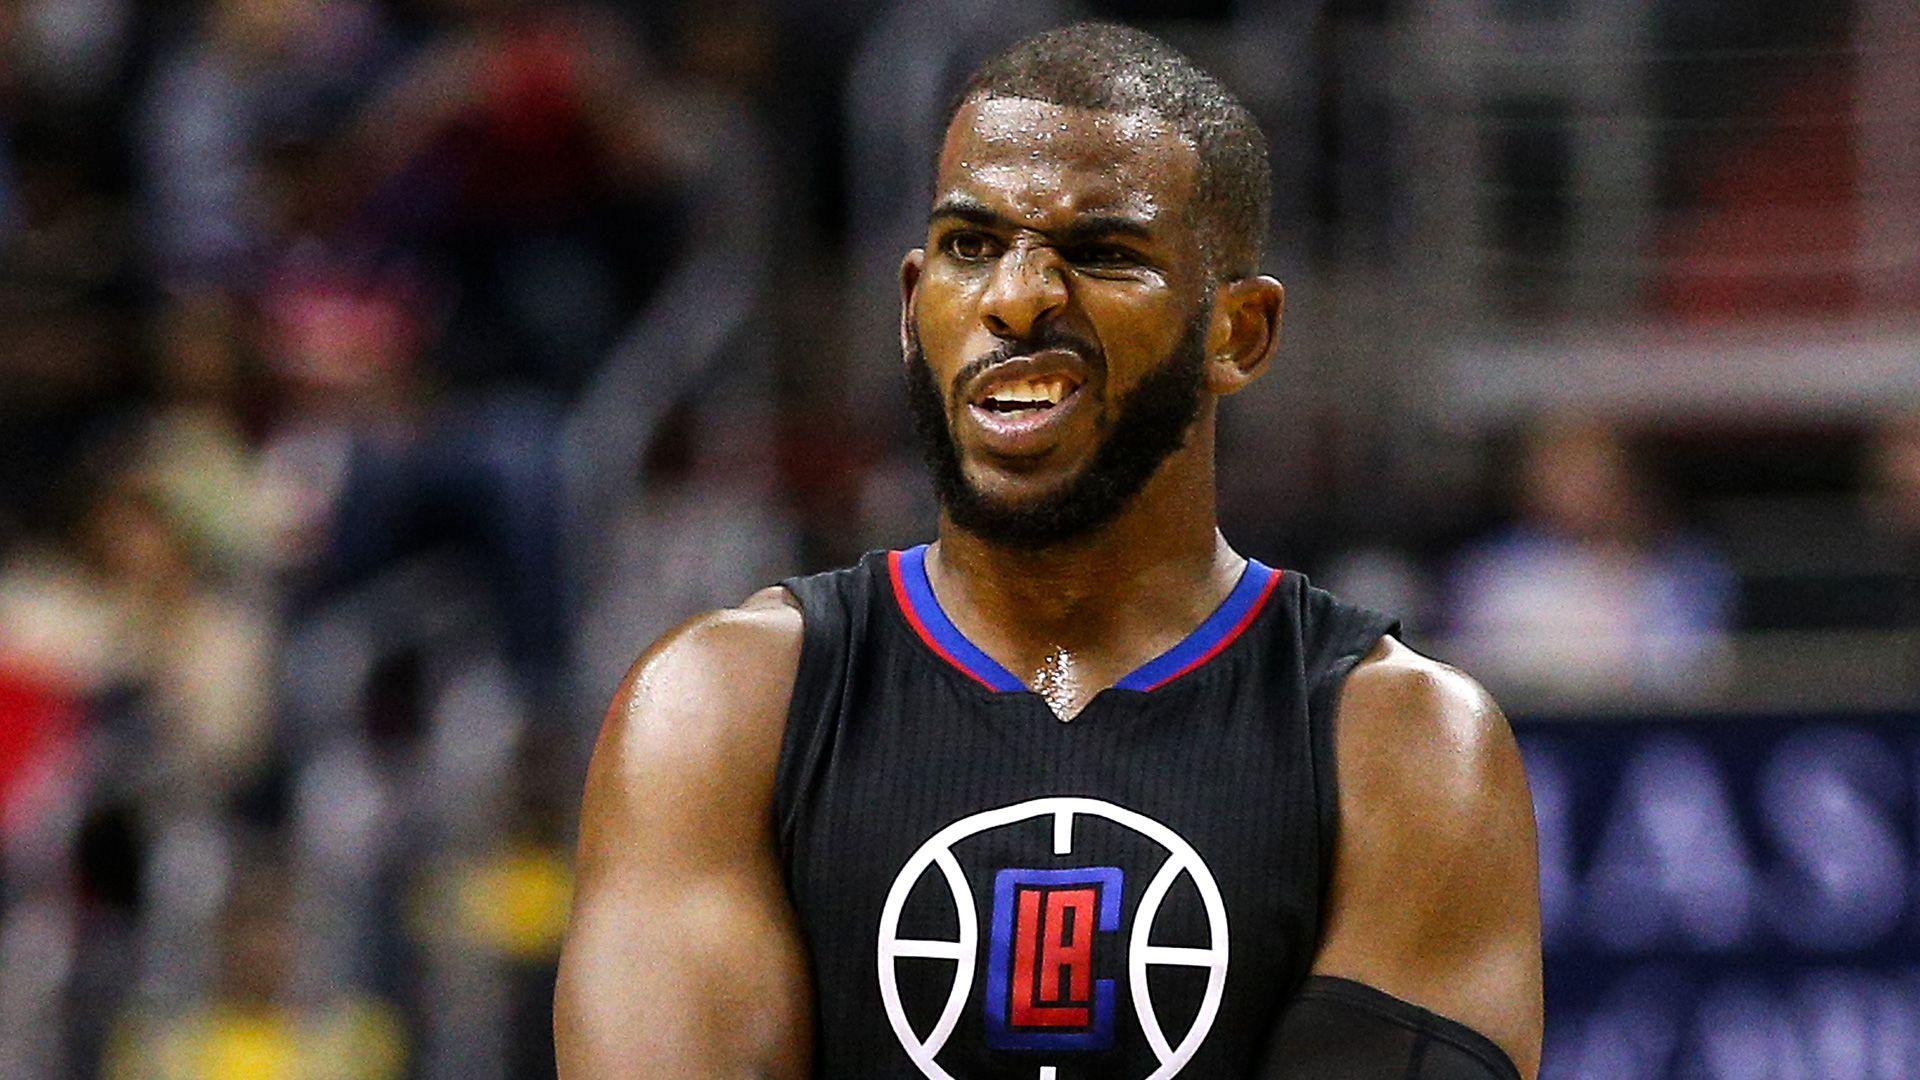 Chris Paul kicks chair, leaves court in anger after spraining